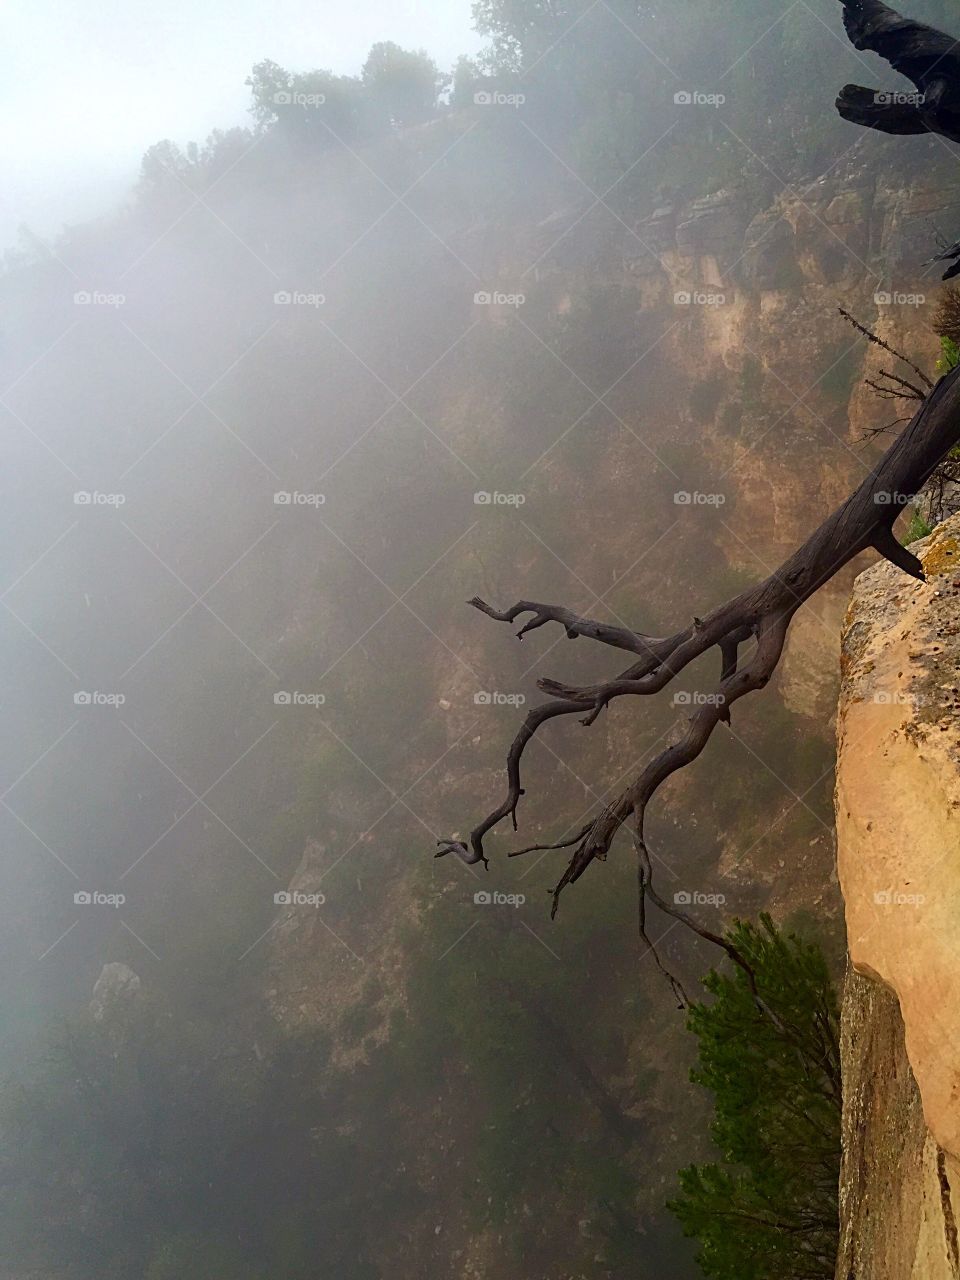 Summer storm Grand Canyon. Cliff, branch, tree, Grand Canyon, fog